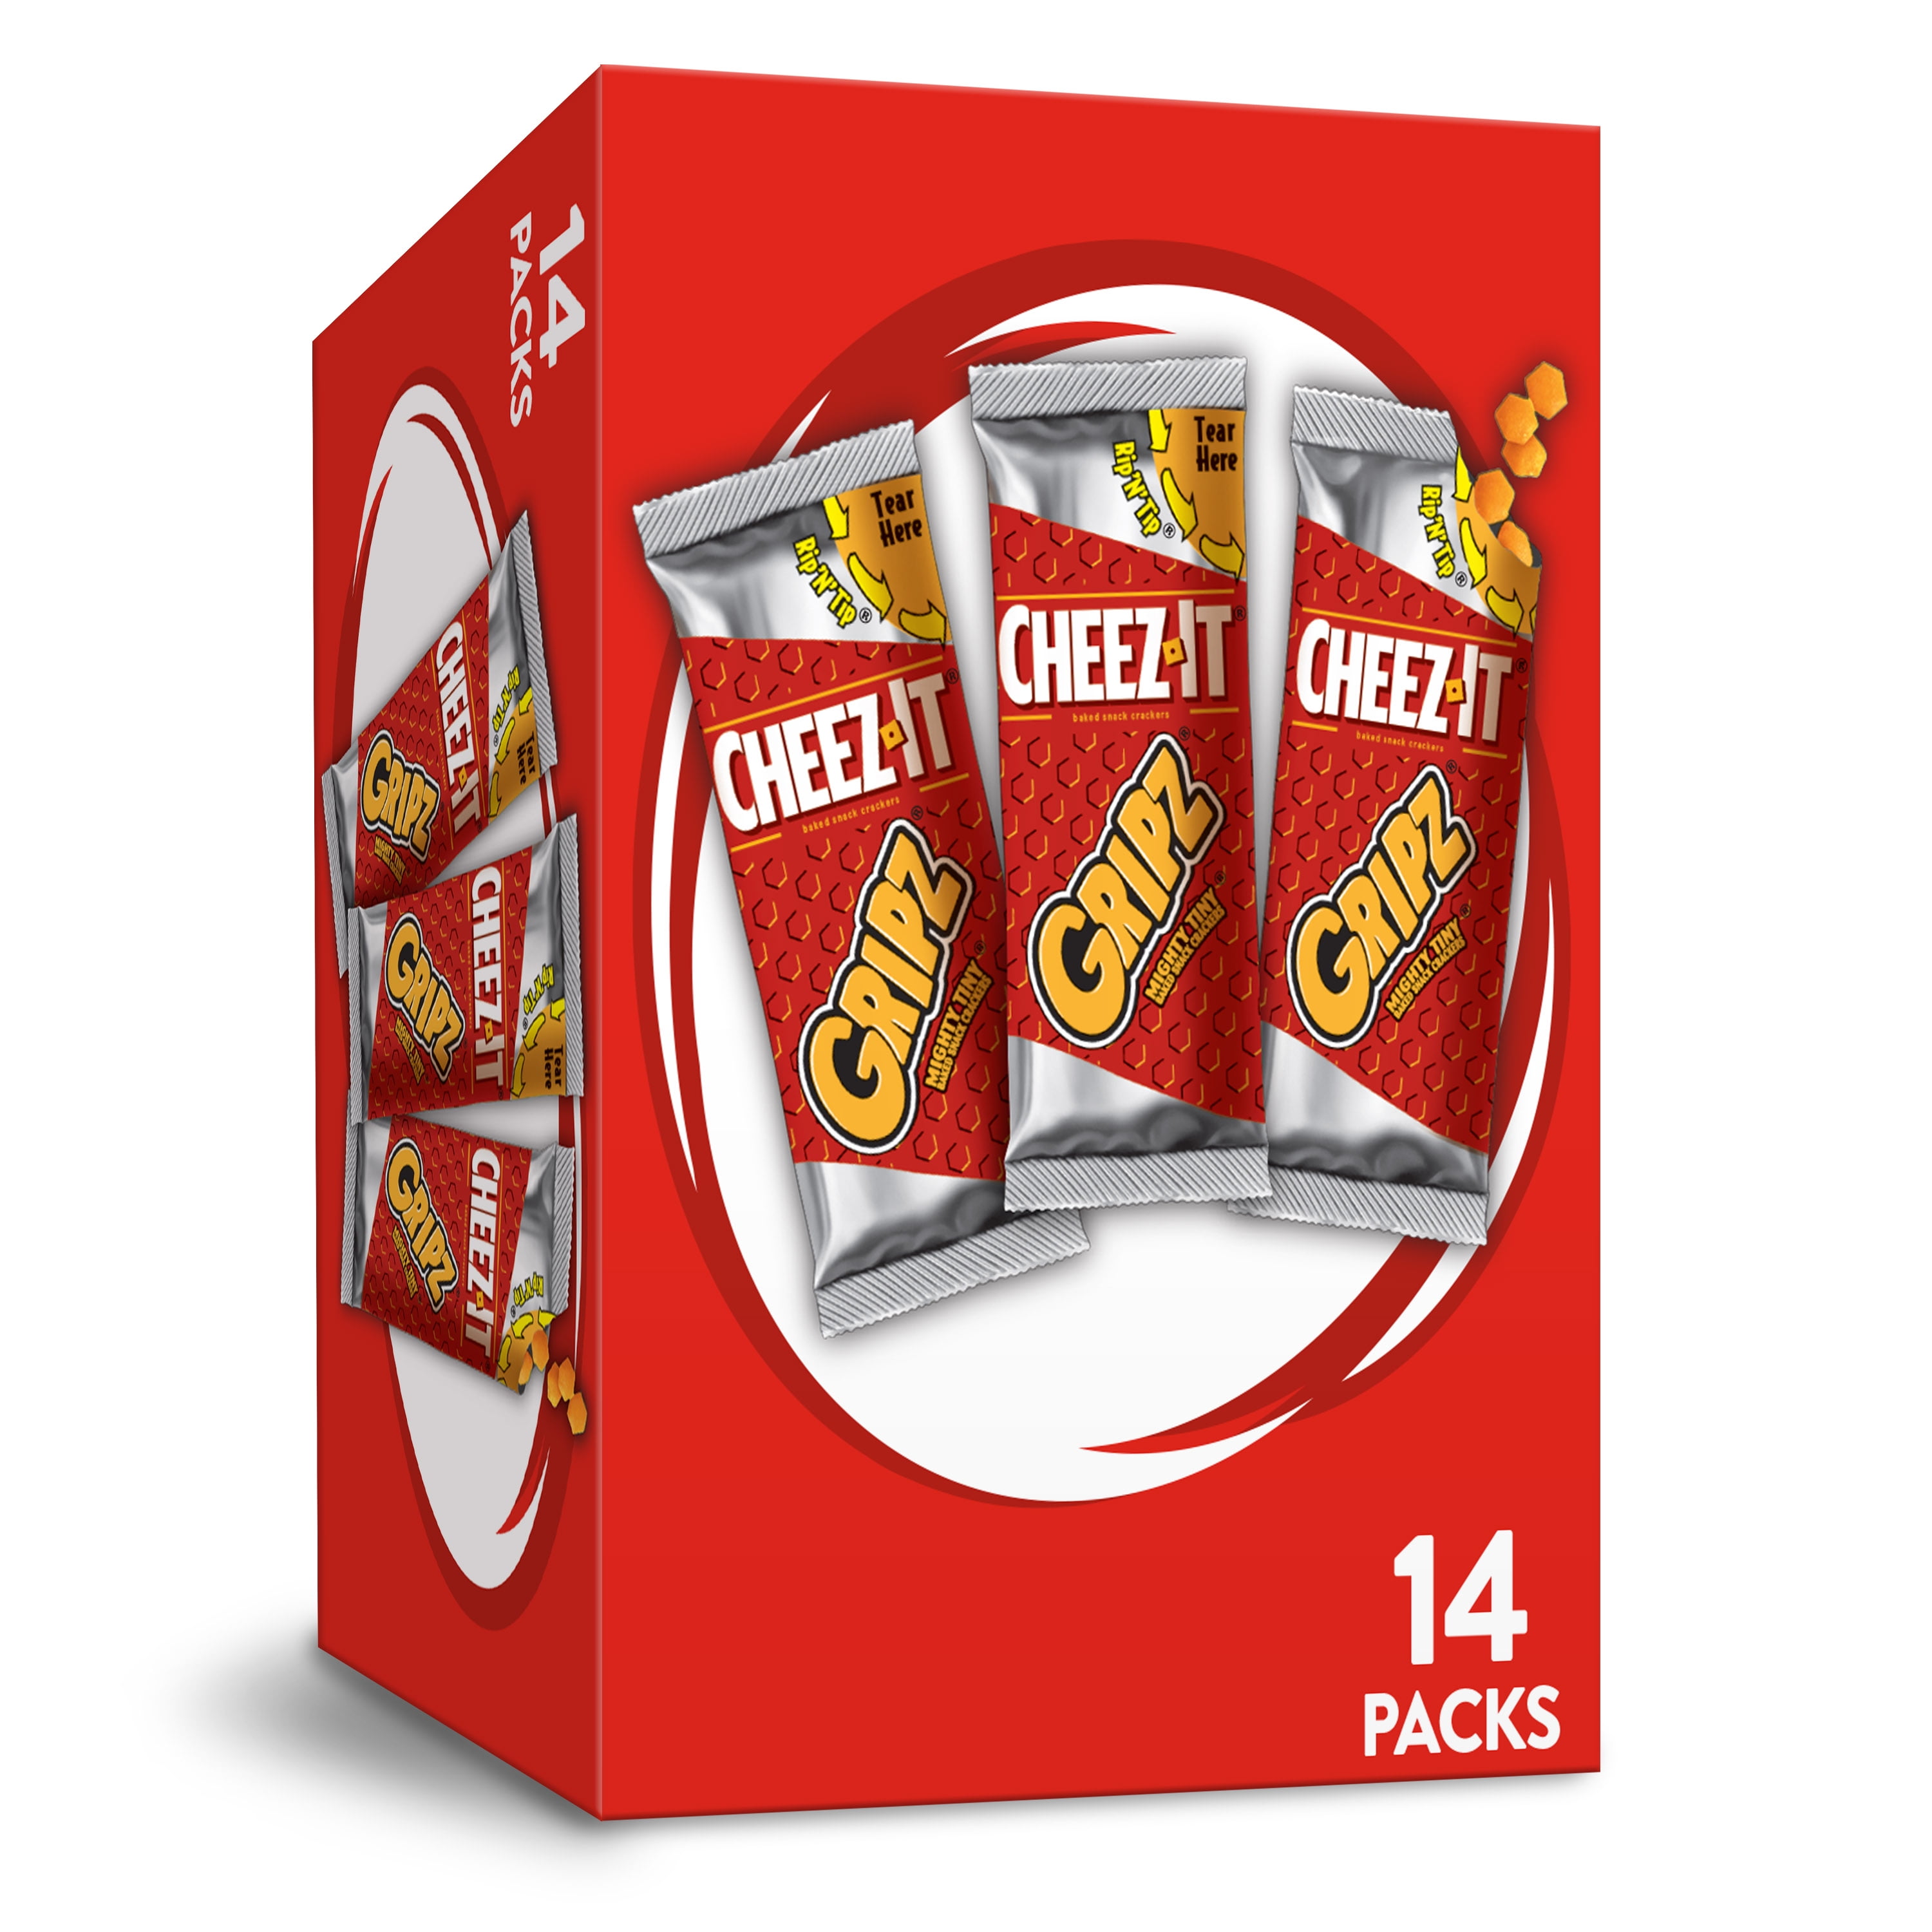 Cheez It Tiny Baked Snack Cheese Crackers Original 12 6 Oz